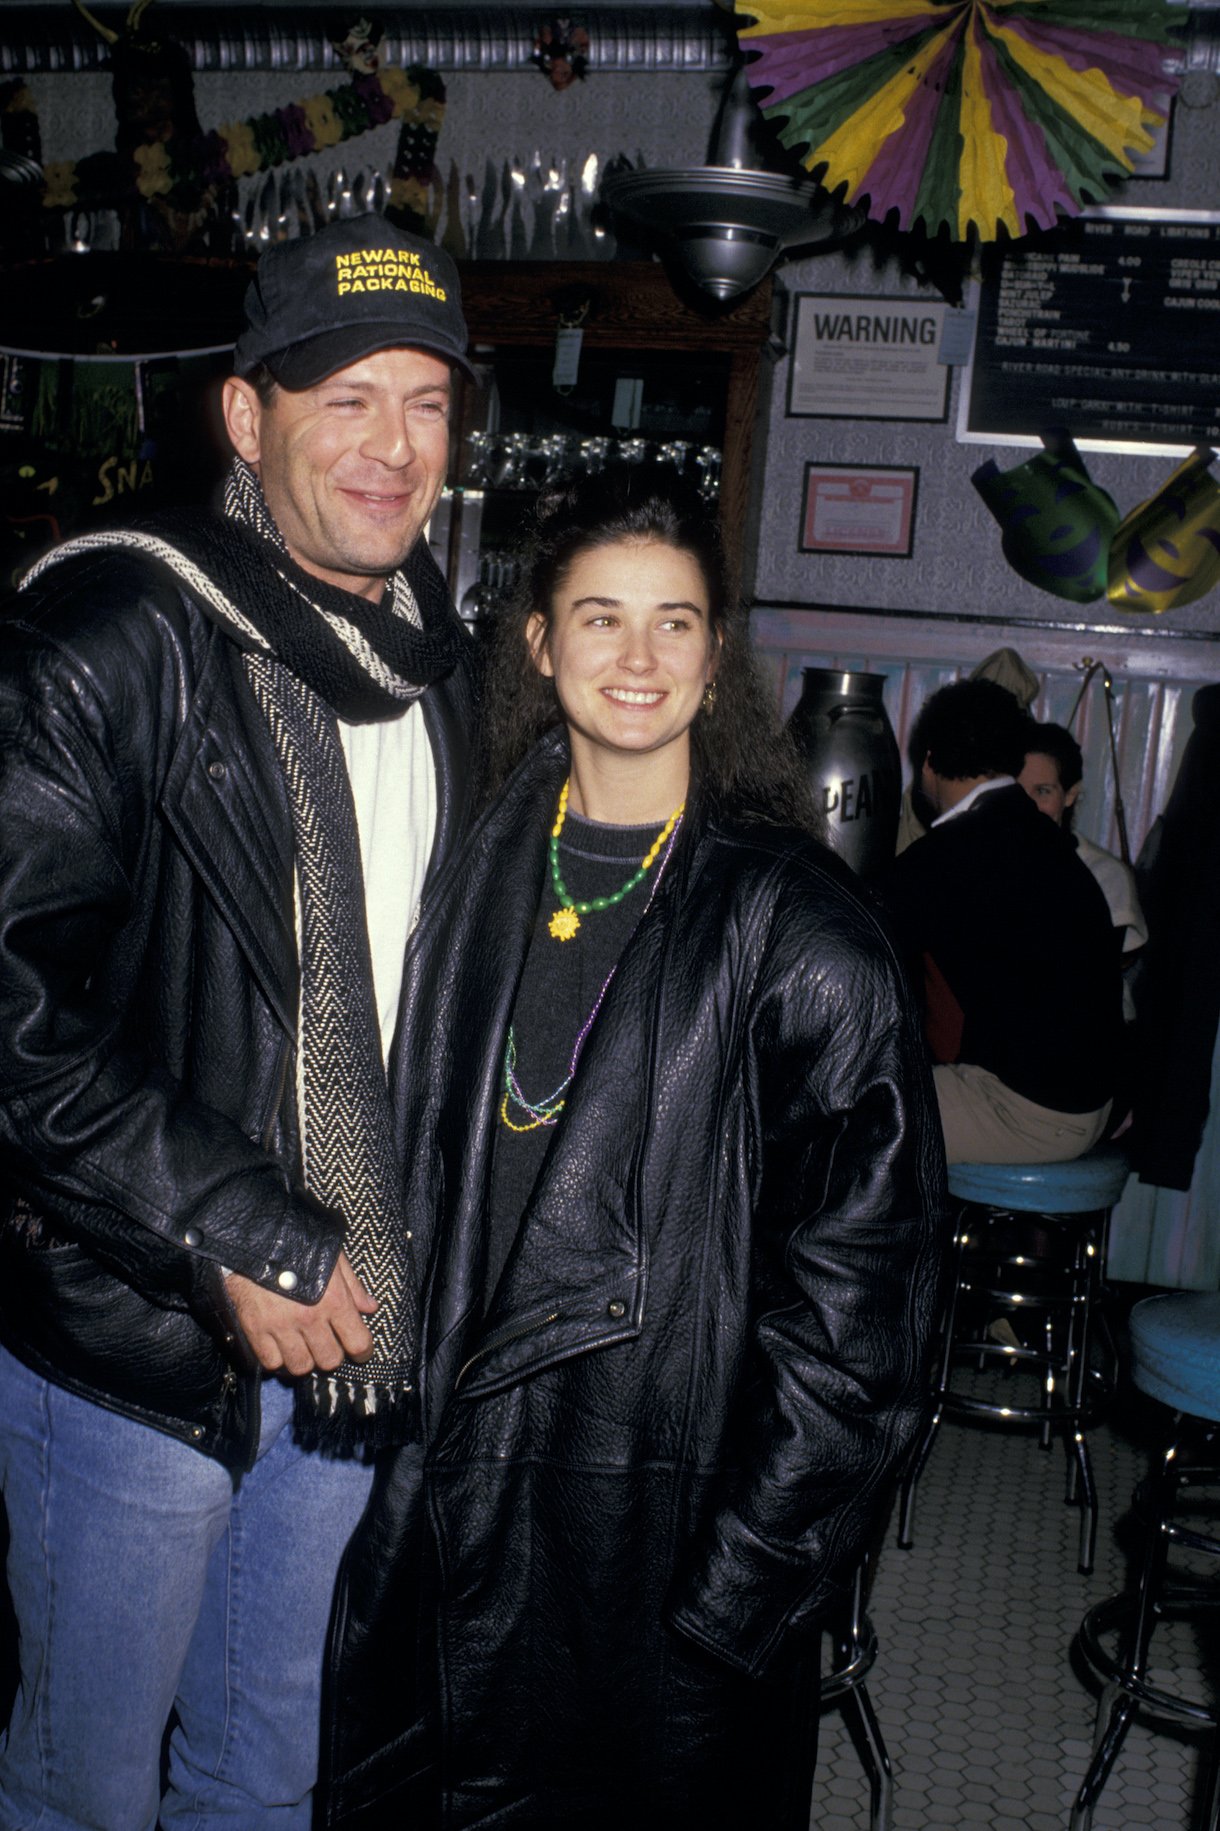 Bruce Willis and Demi Moore Sighting at the Ruby's River Road Cafe in New York City - February 15, 1988